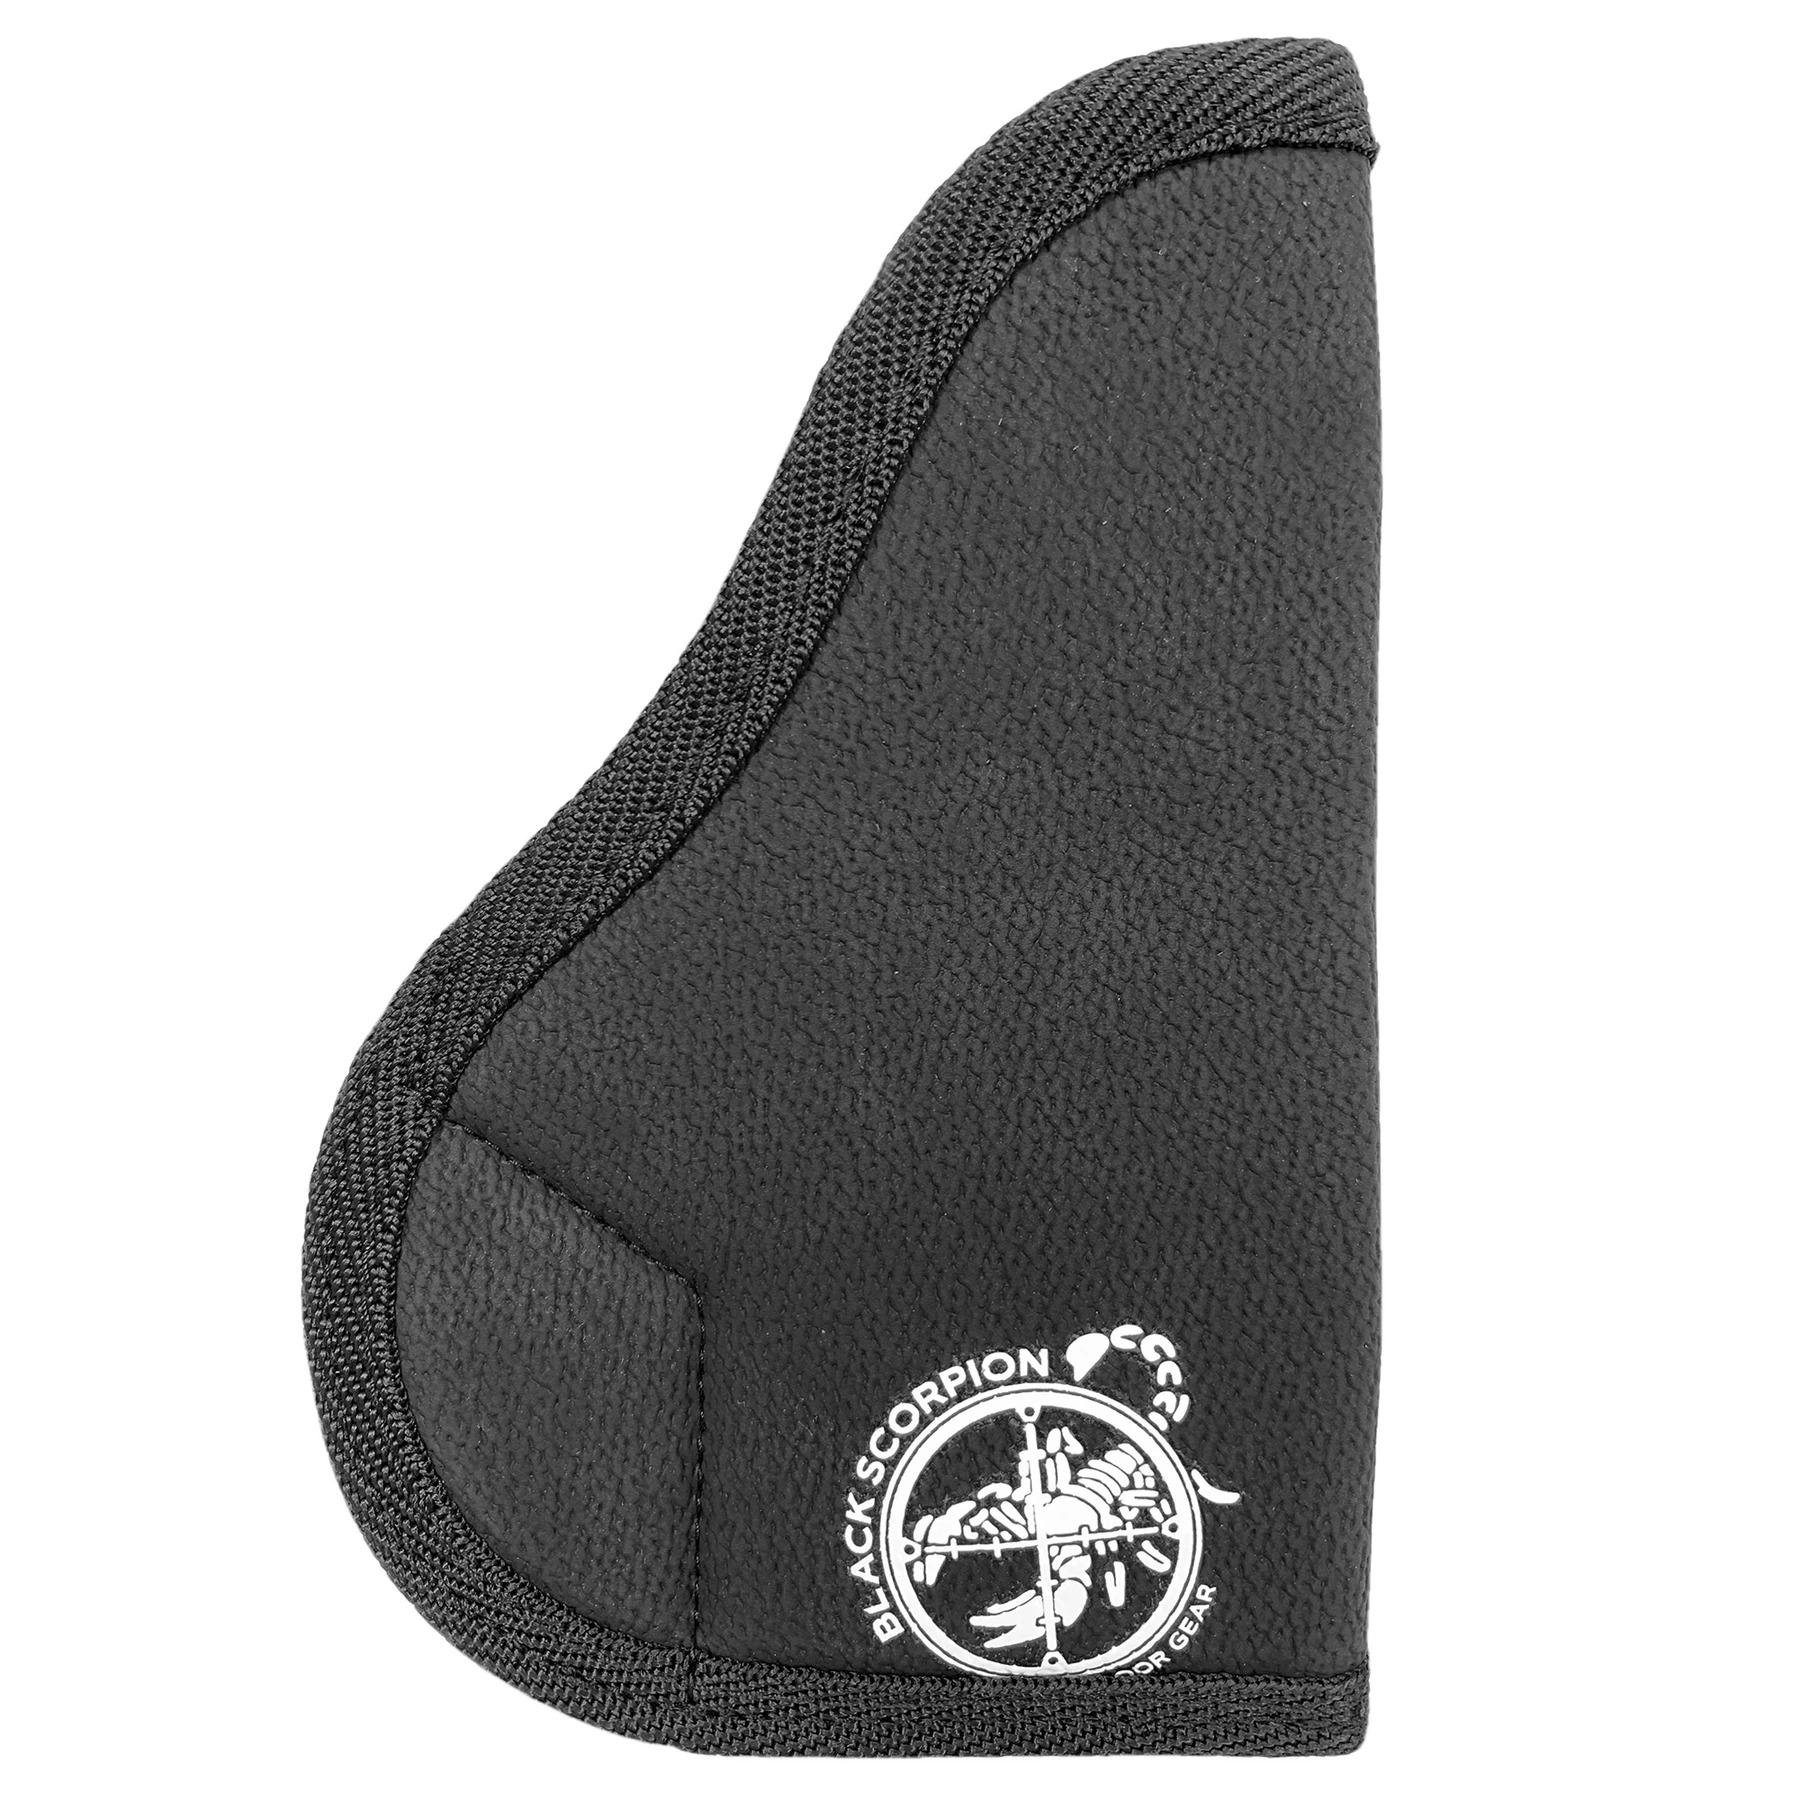 Black Scorpion Body Grip Holster Single Stack Sub-Compacts - 4Shooters